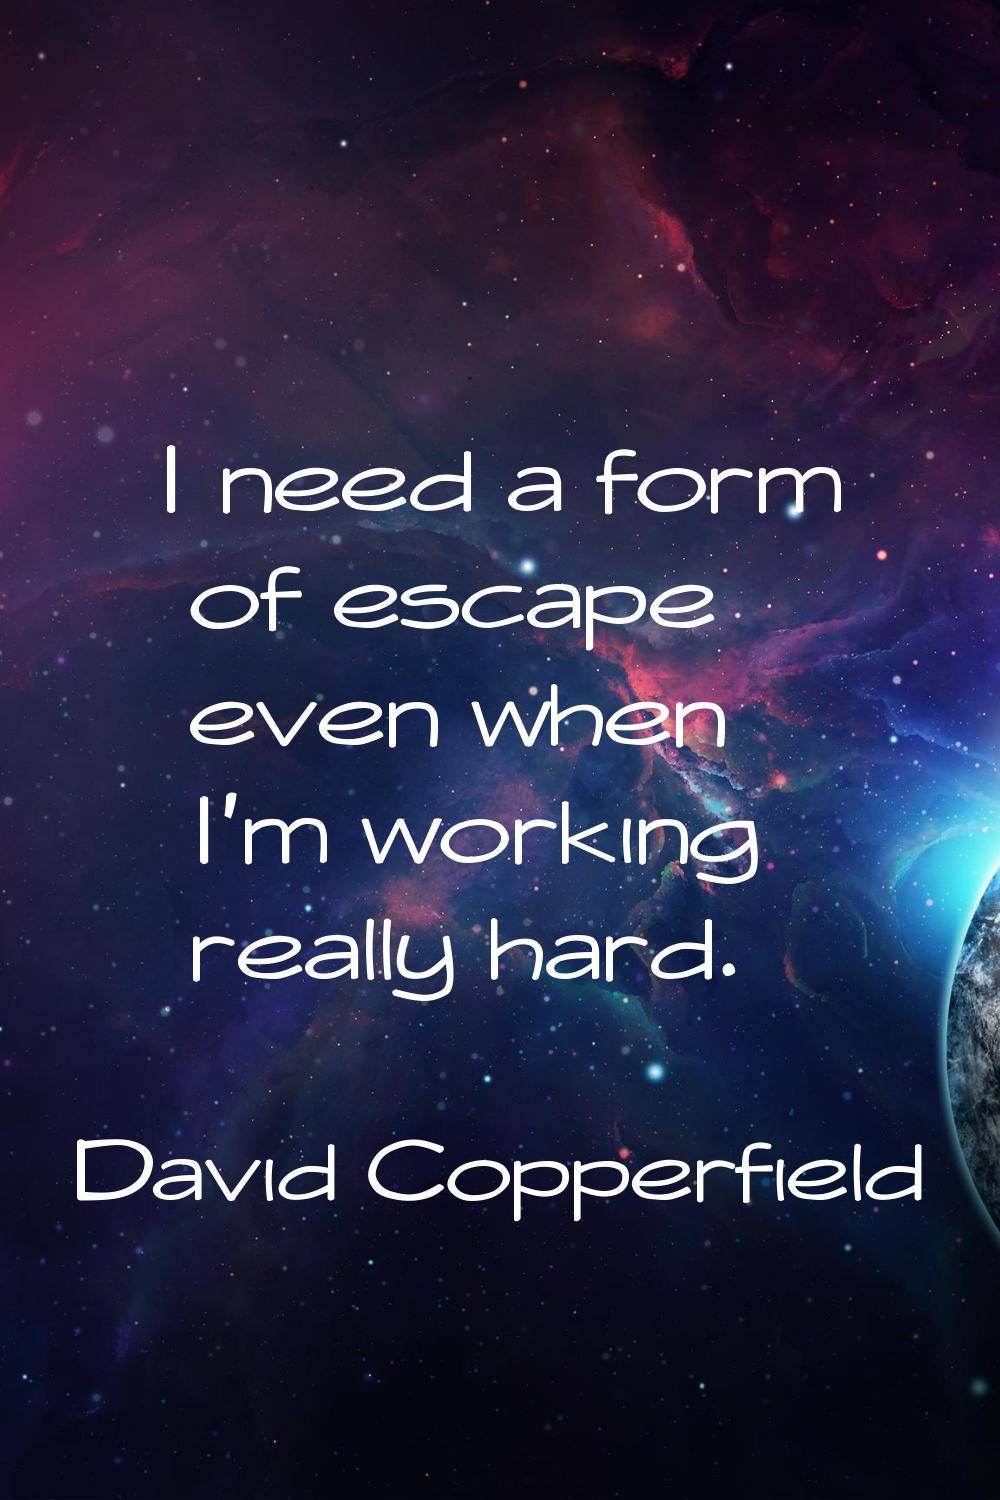 I need a form of escape even when I'm working really hard.